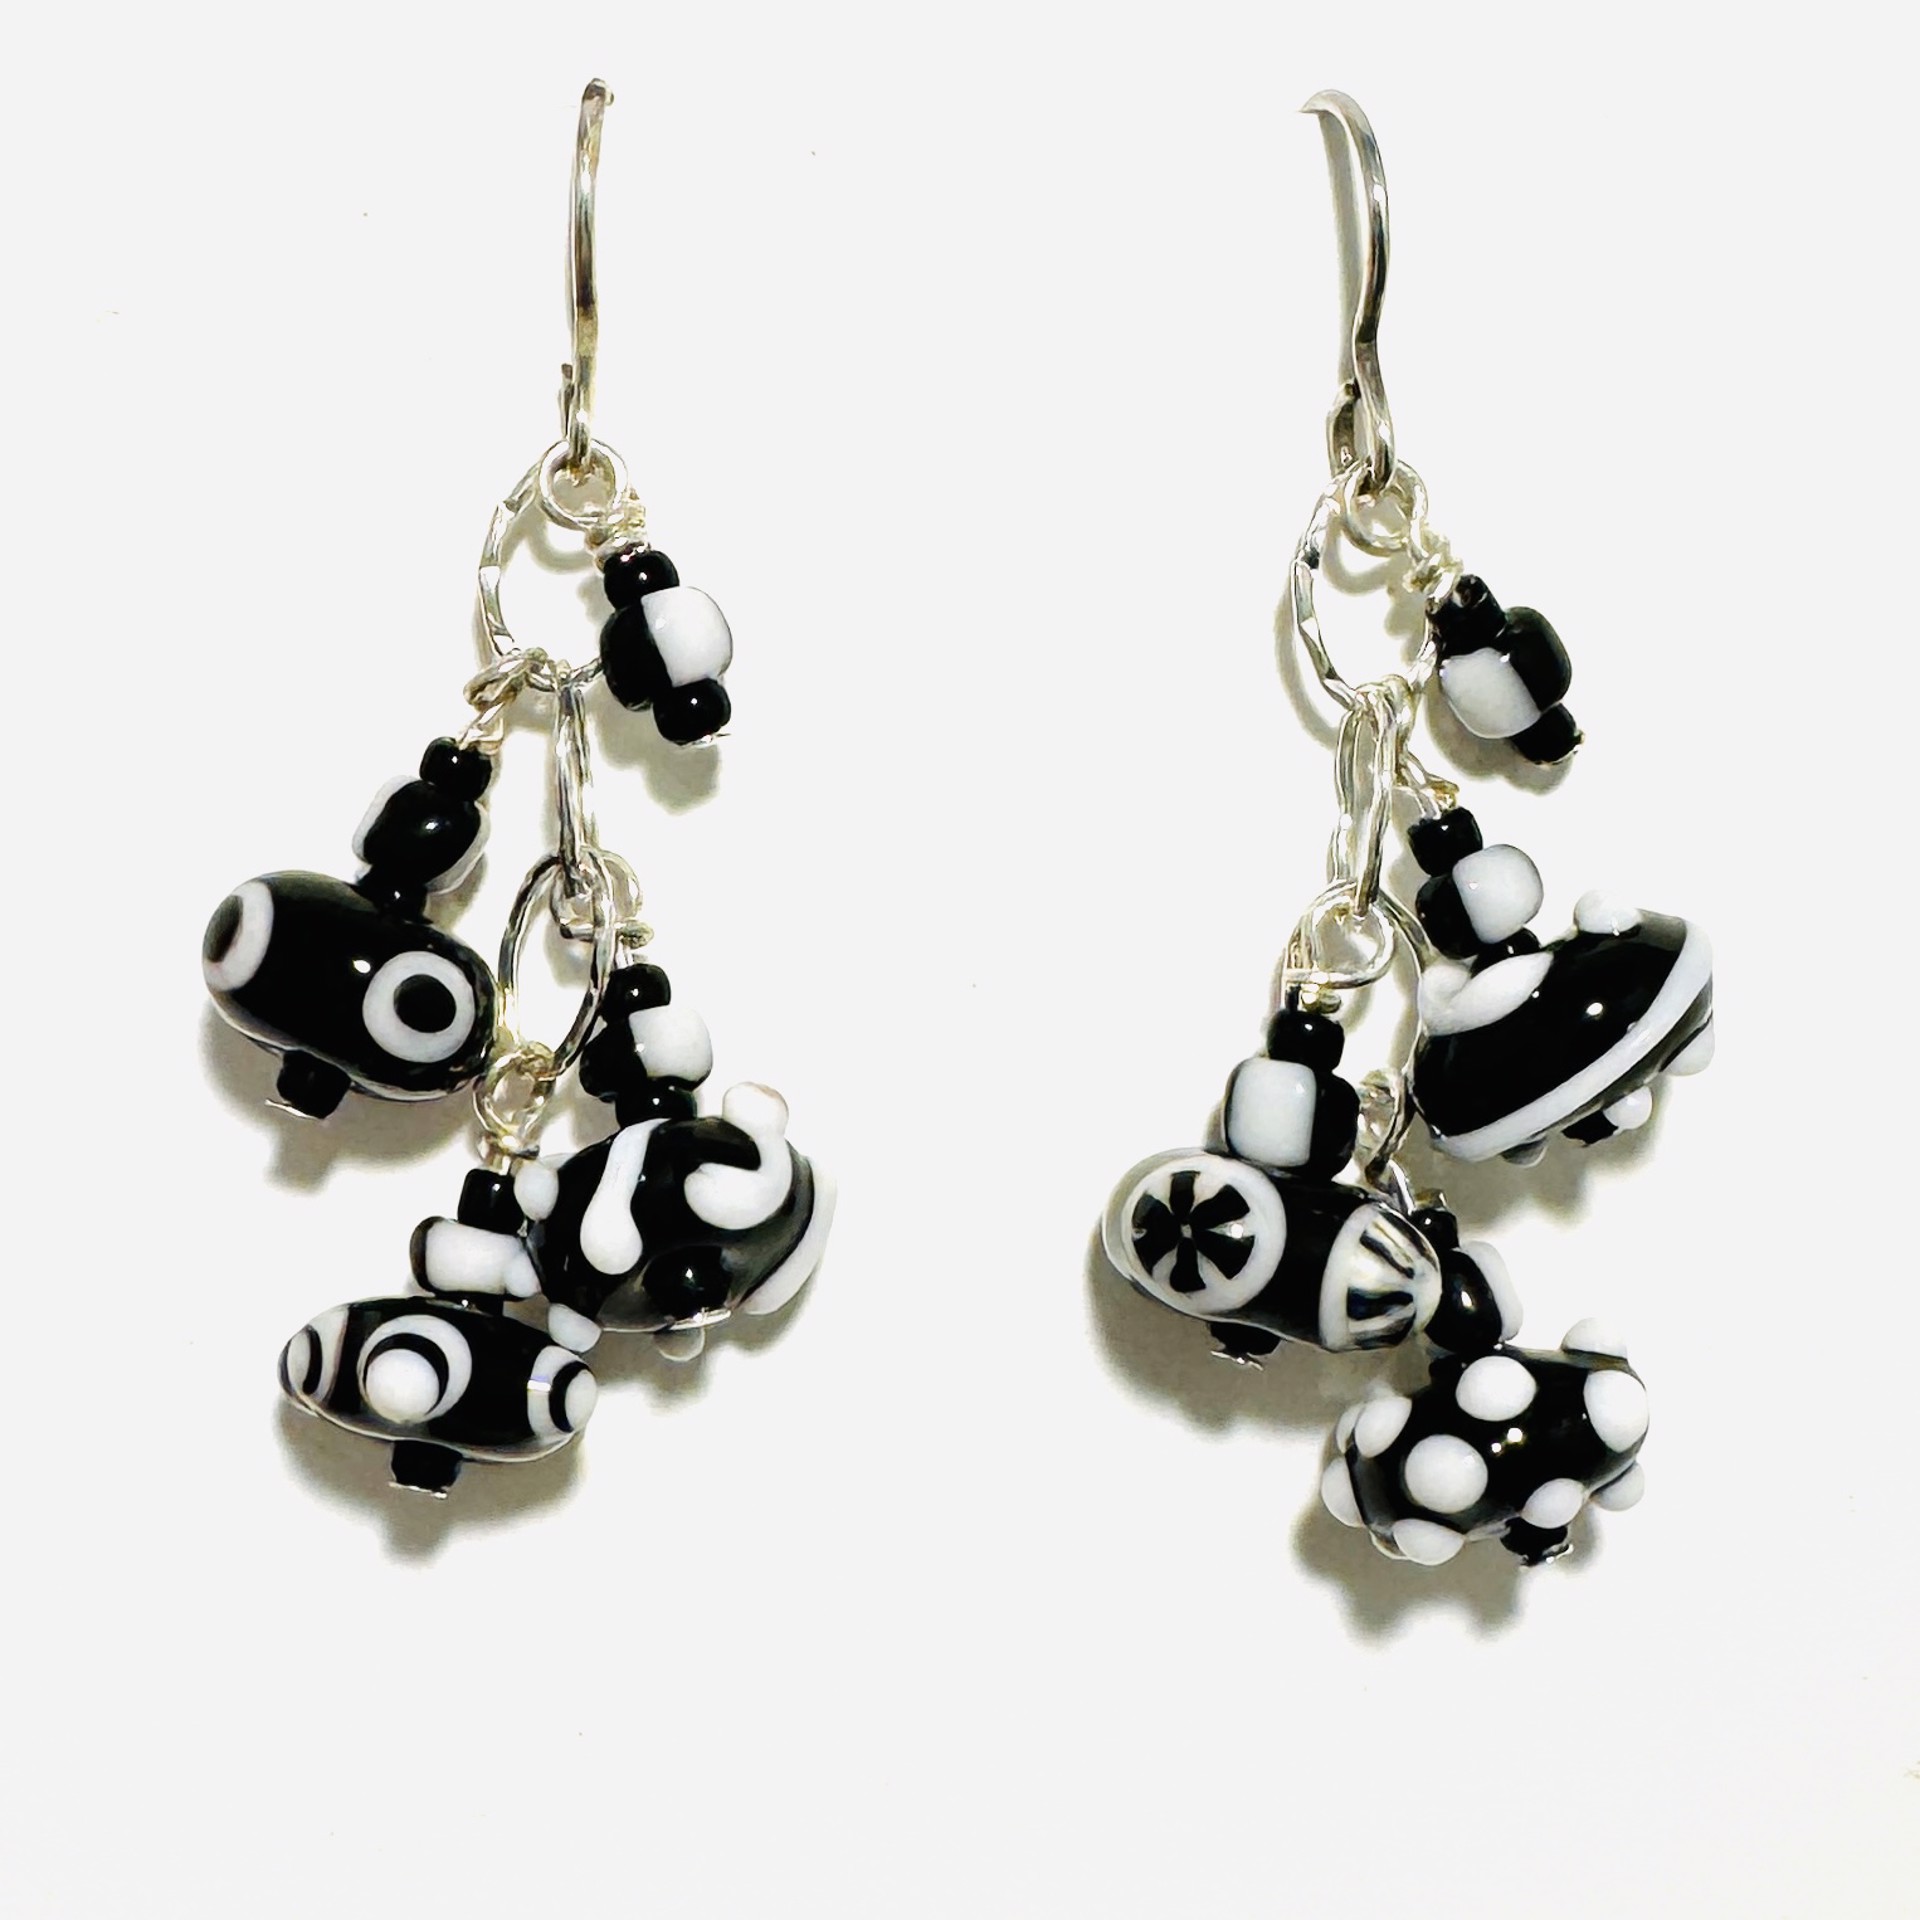 Black and White Mix Bubble Bead Earrings LS23-41 by Linda Sacra